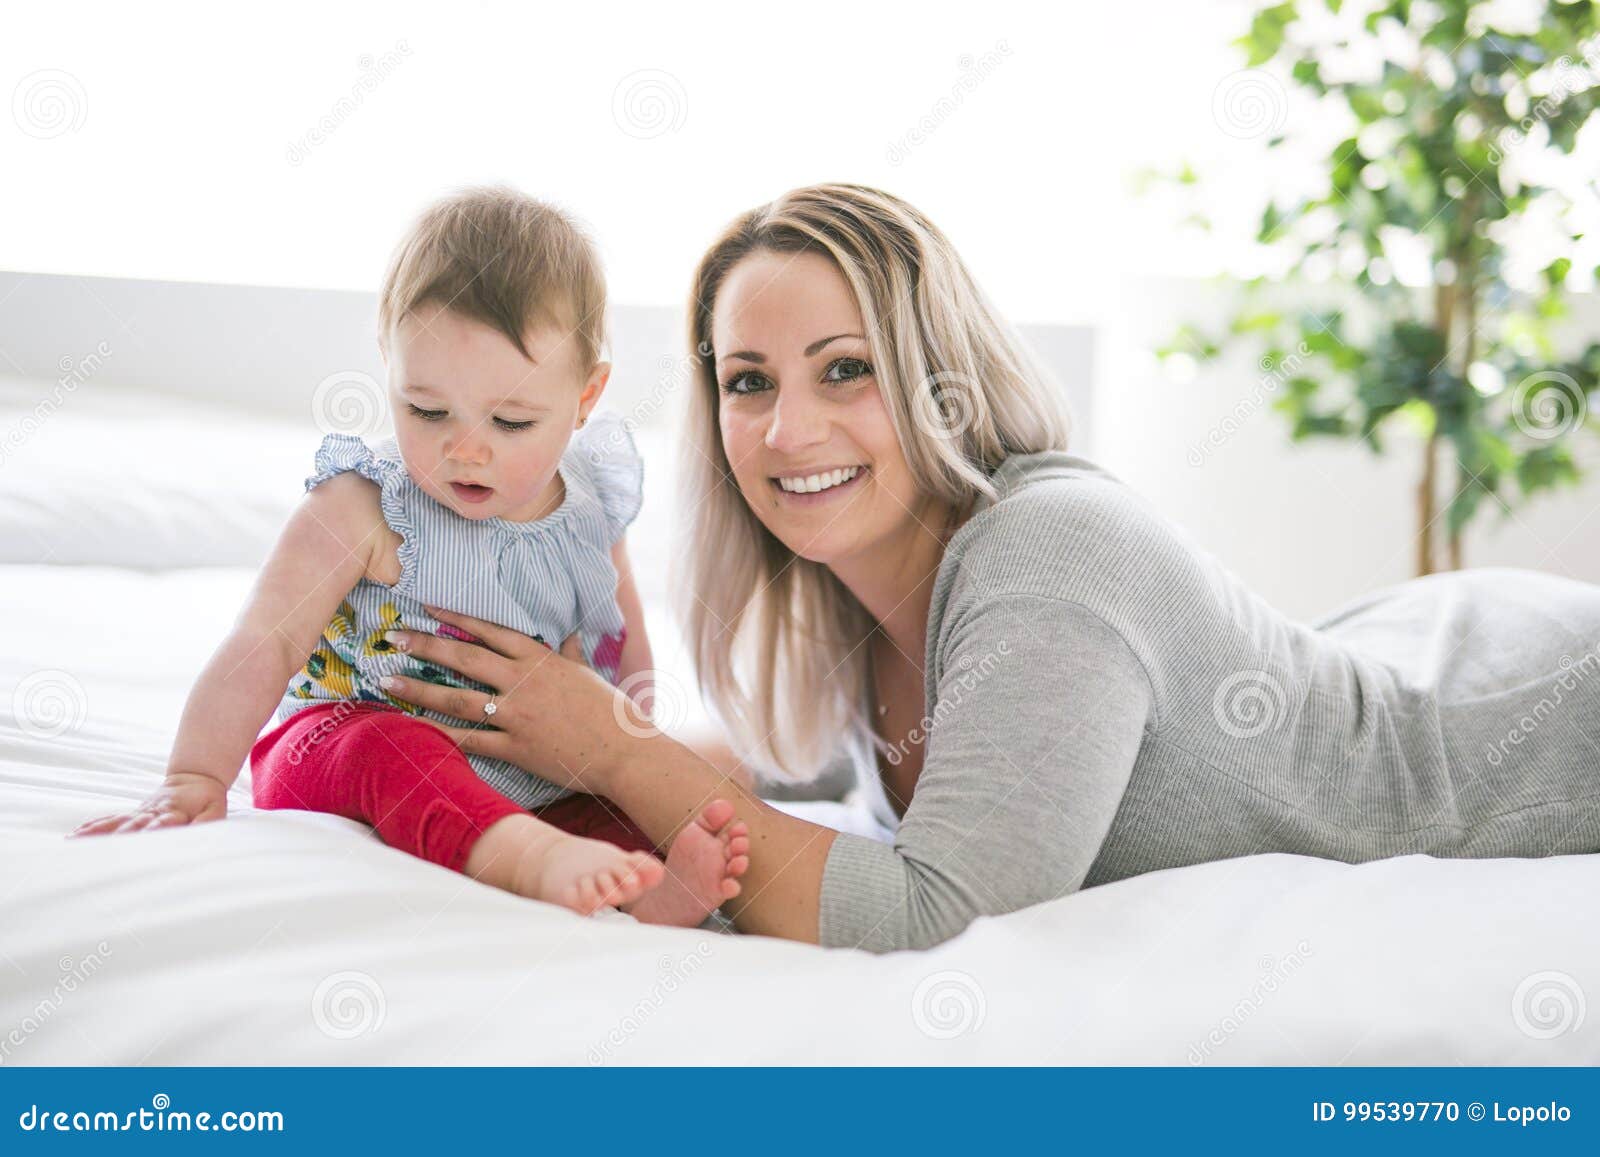 Pretty Baby Sit on Mom in Silk Bed Stock Photo - Image of caucasian ...